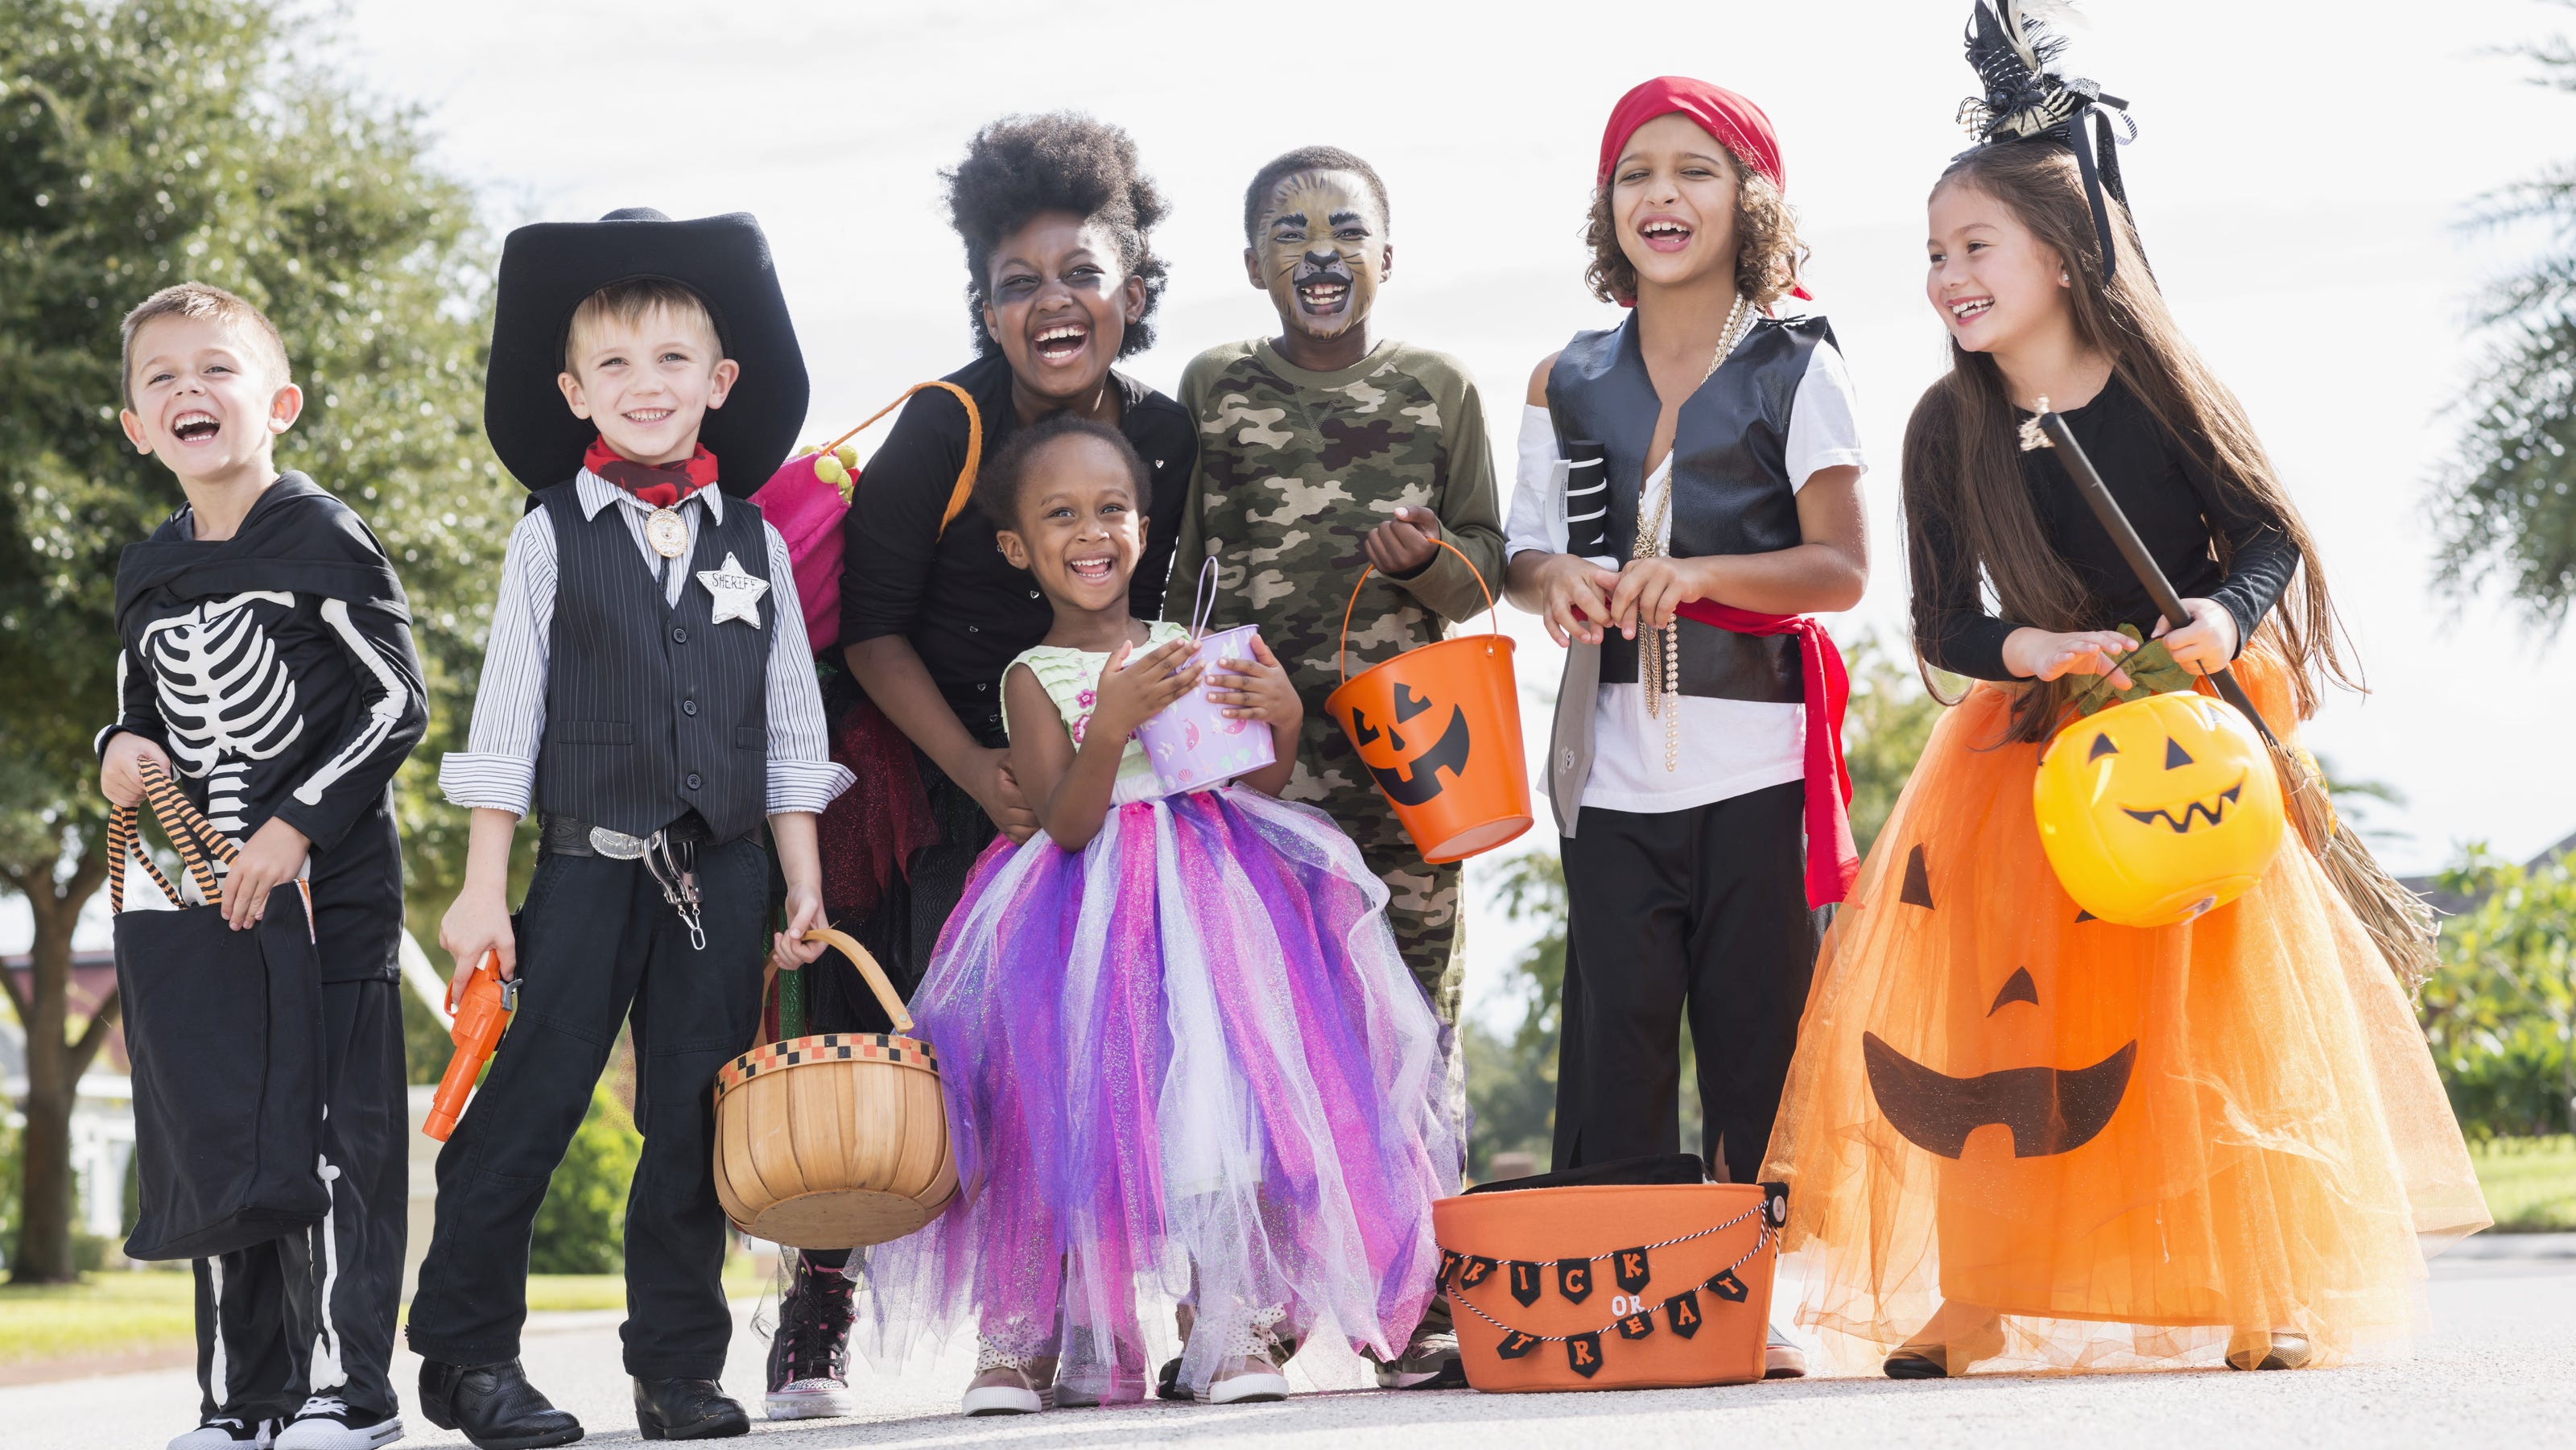 River Region will get haunted by a ton of Halloween and fall festival fun in October